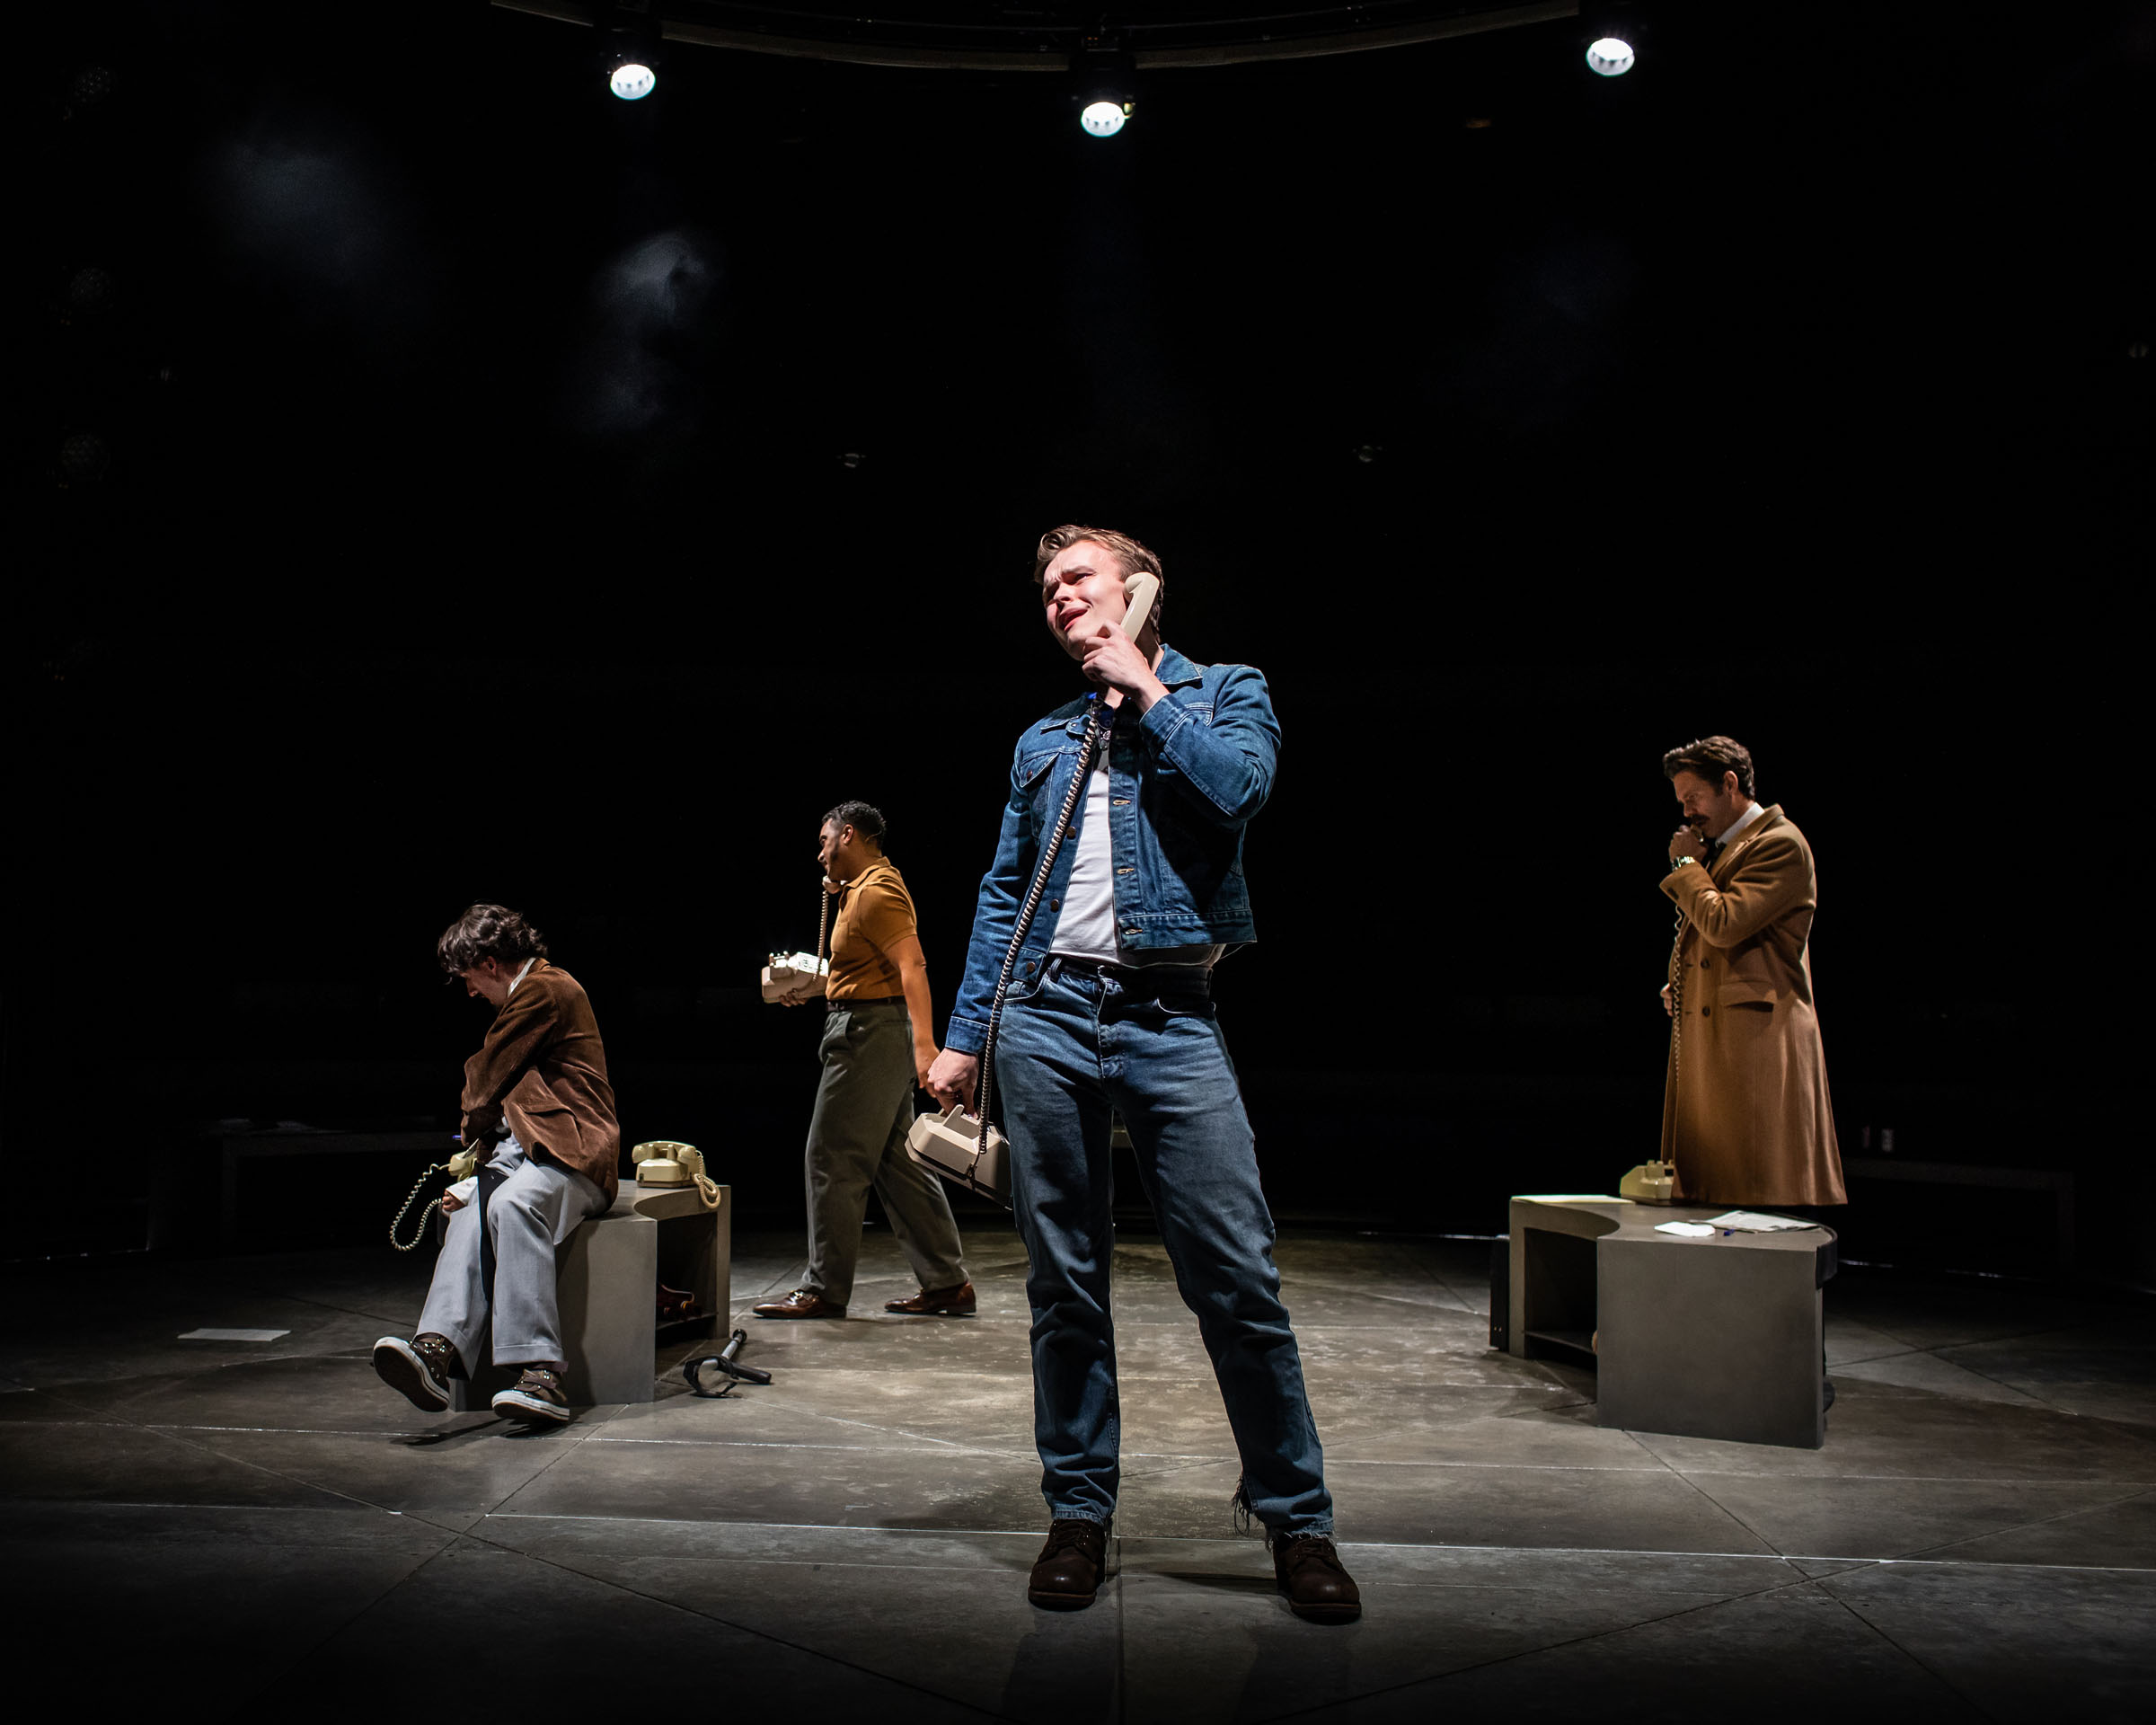 The Normal Heart by Larry Kramer at the National Theatre